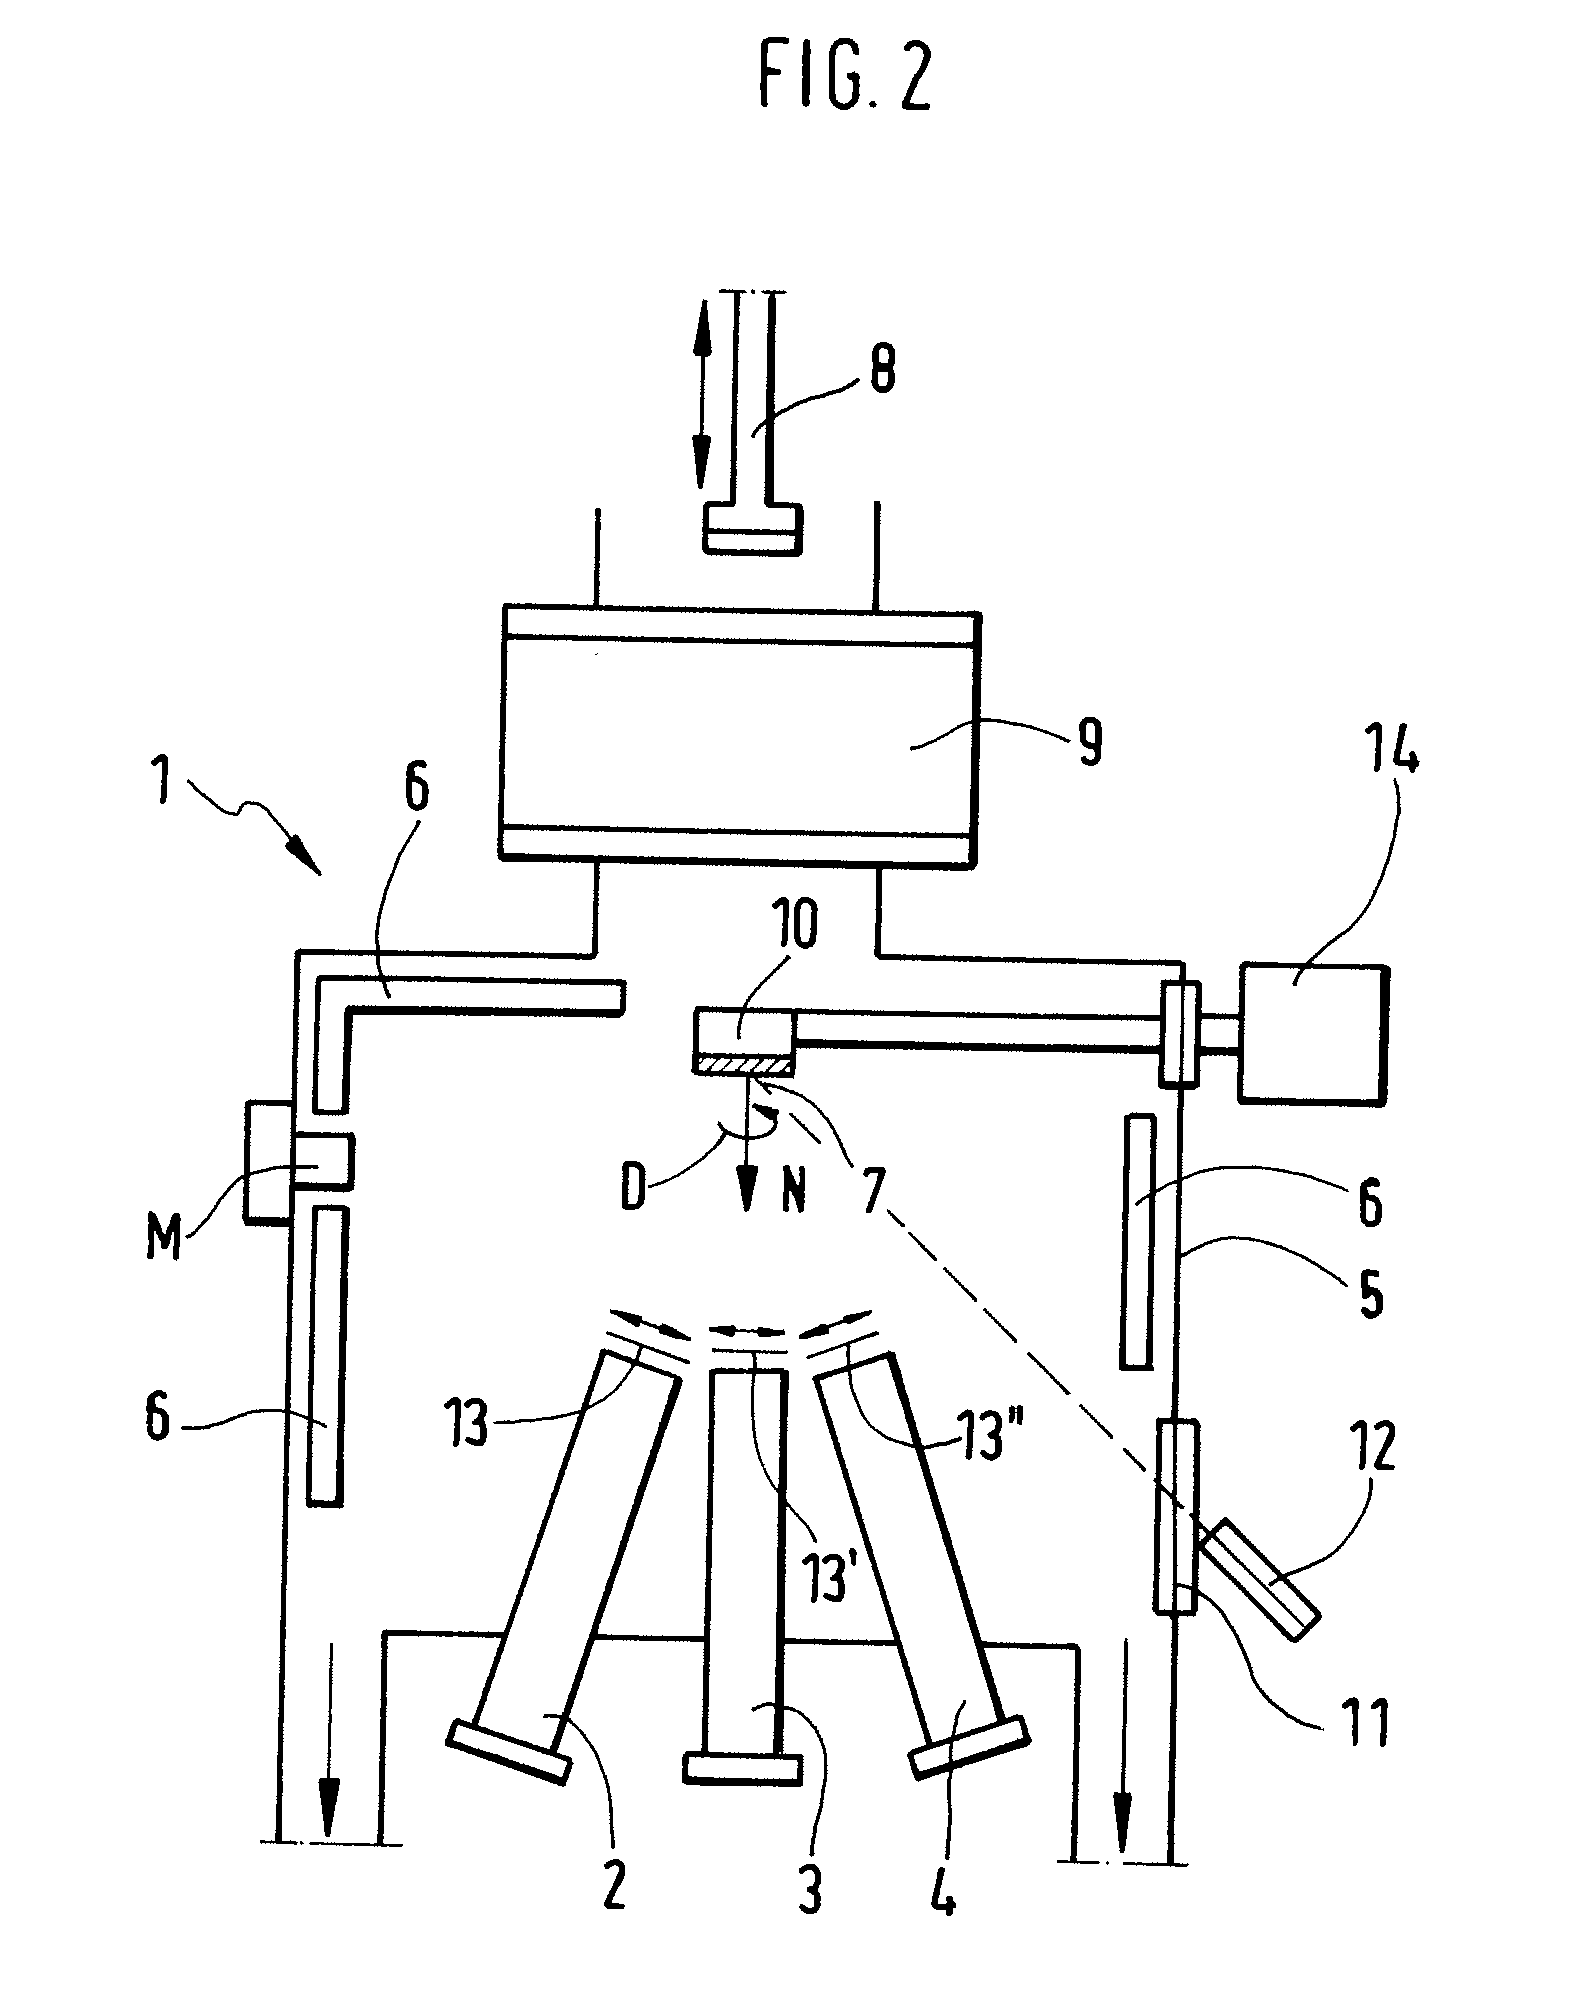 Process for producing a free-standing iii-n layer, and free-standing iii-n substrate